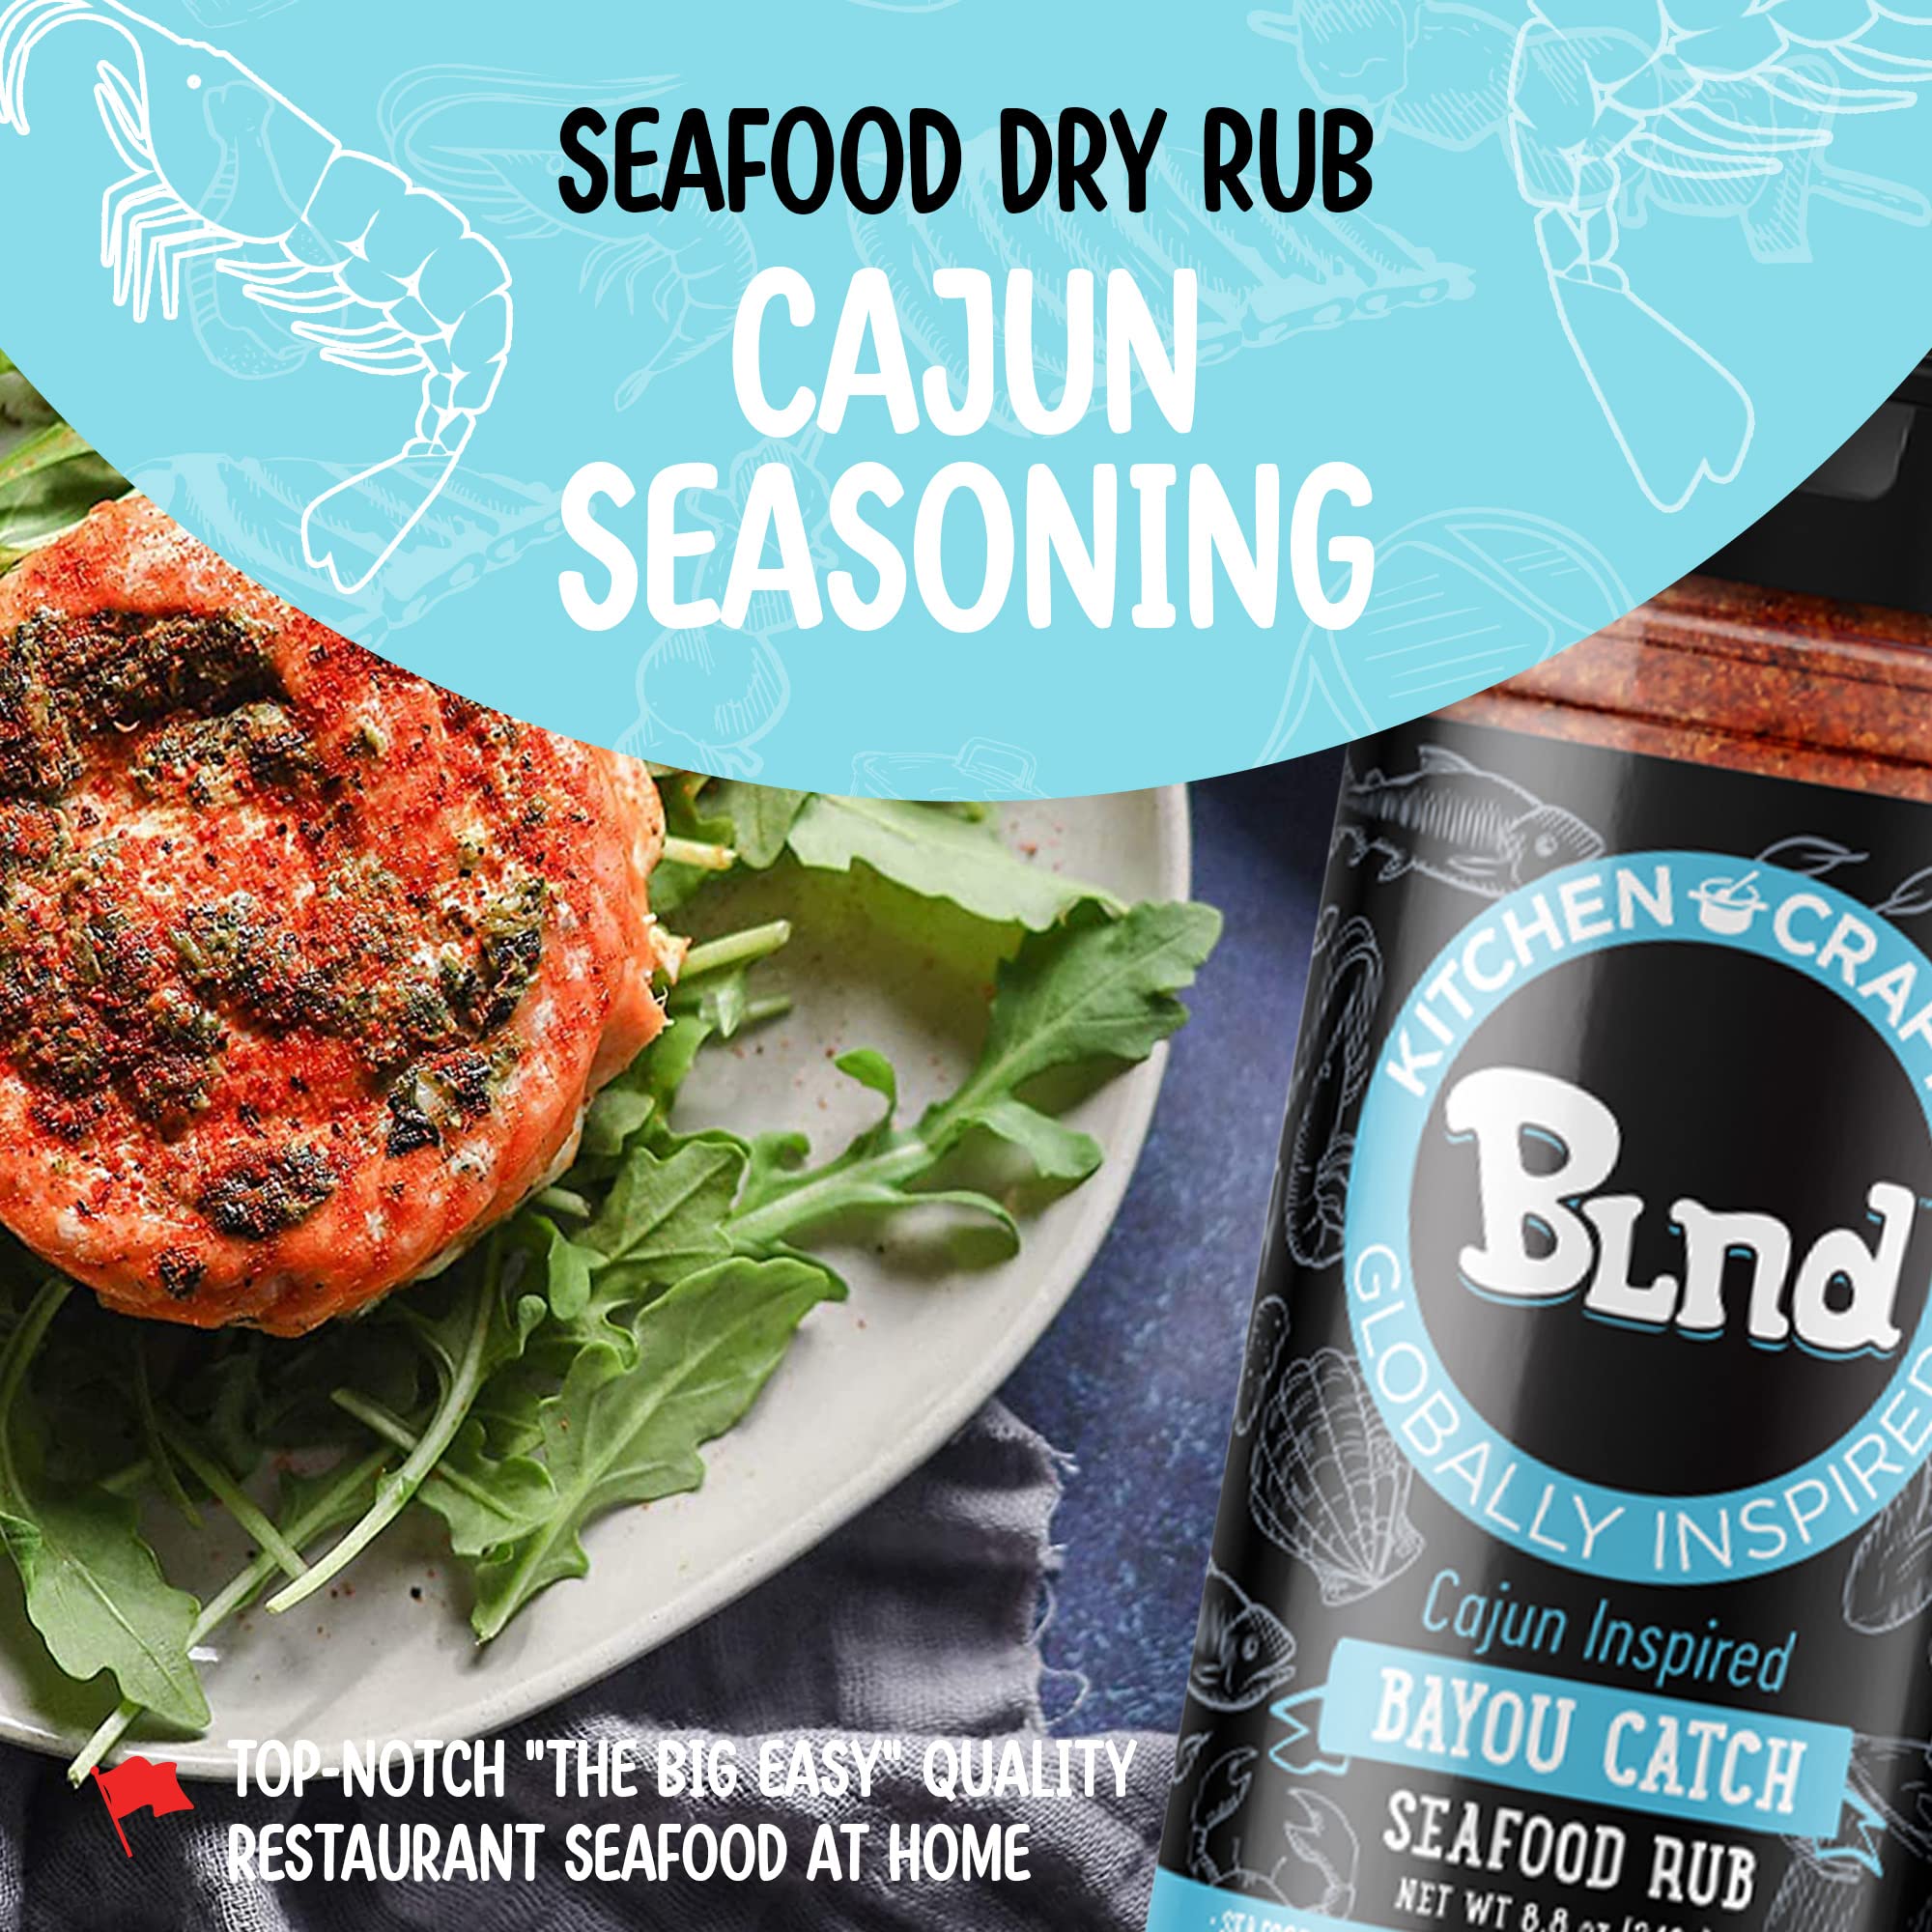 Bayou Catch Cajun Seasoning, Traditional Louisiana Spices and Seasonings, Gluten-Free Seasonings and Spices for Cooking, Non GMO Fish Seasoning and Cooking Spices, 8.8 oz